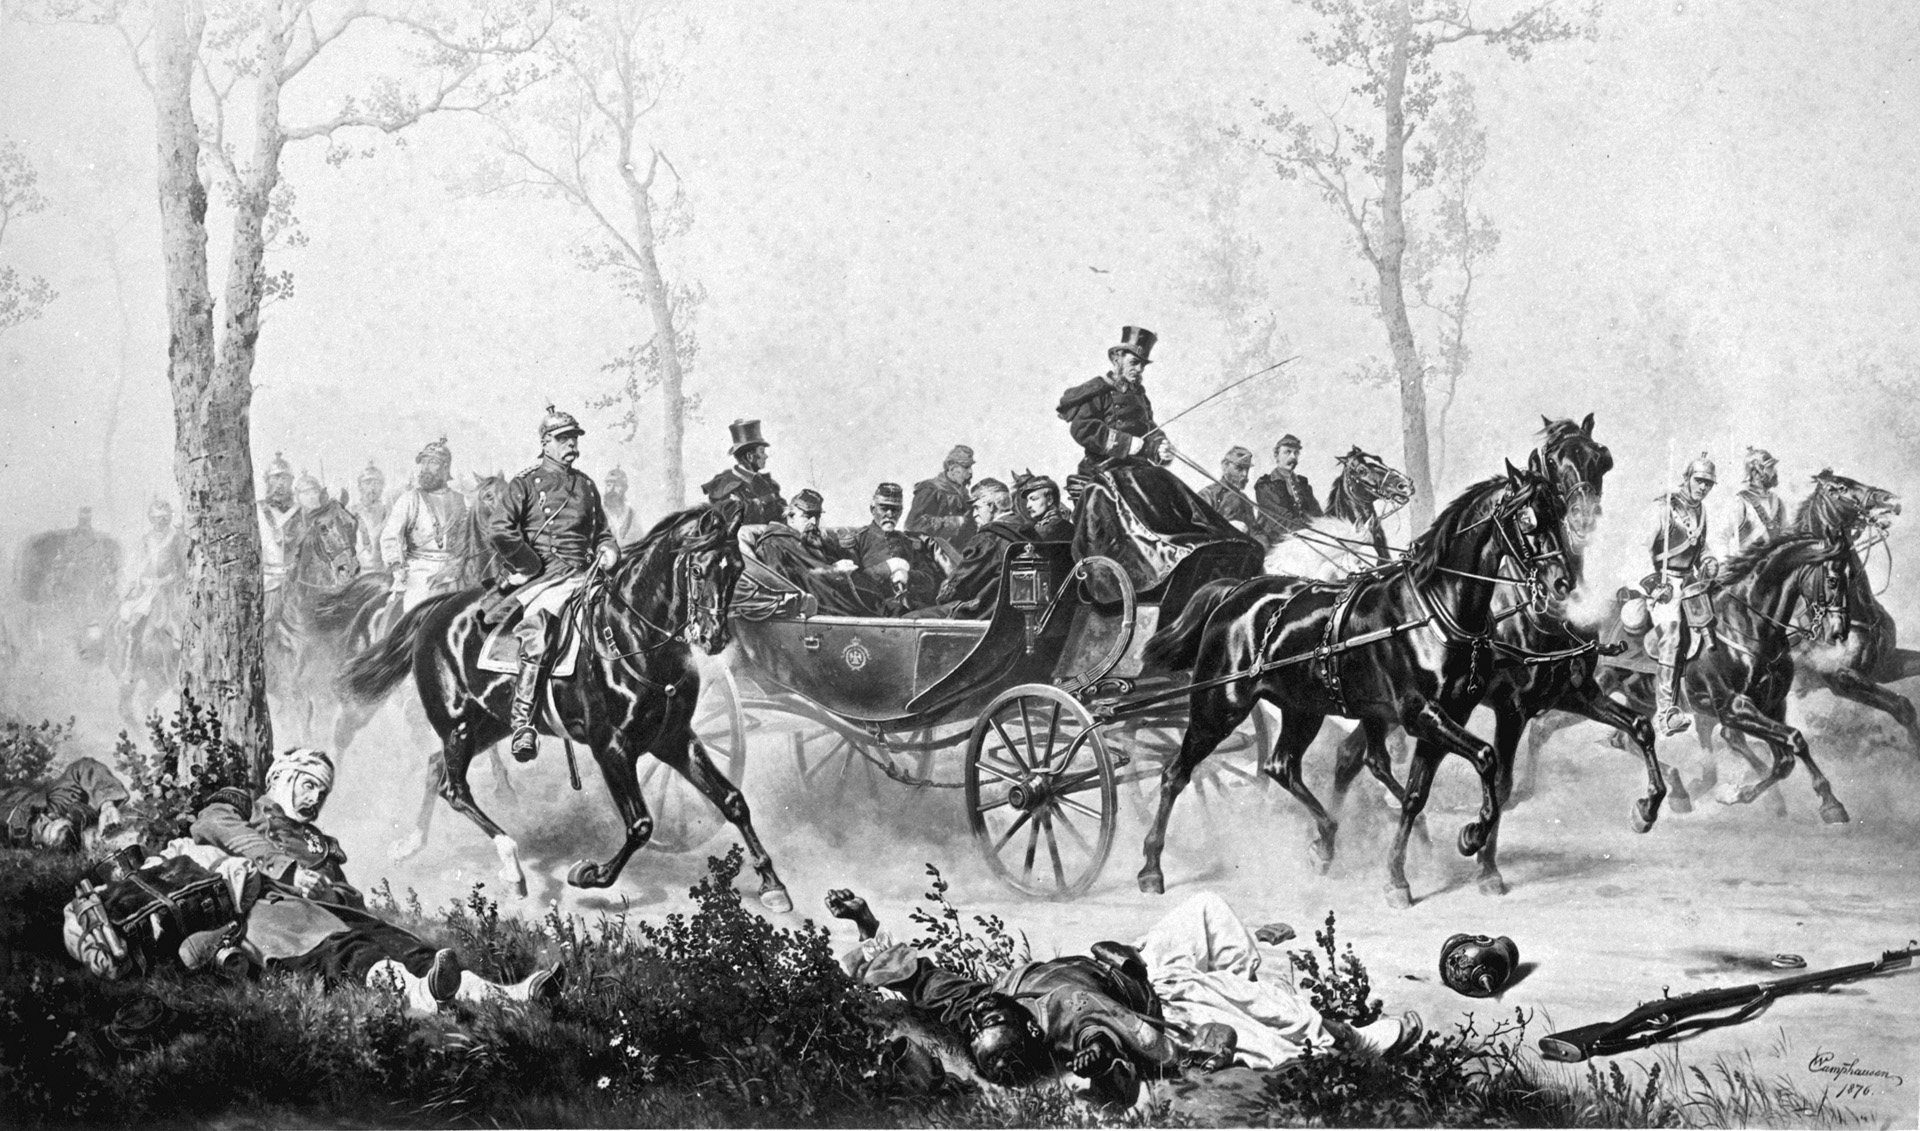 Bismarck, on horseback, meets with Napoleon III. Bismarck would not allow Napoleon to meet with Kaiser Wilhelm until Napoleon had completely surrendered the entire French Army. 